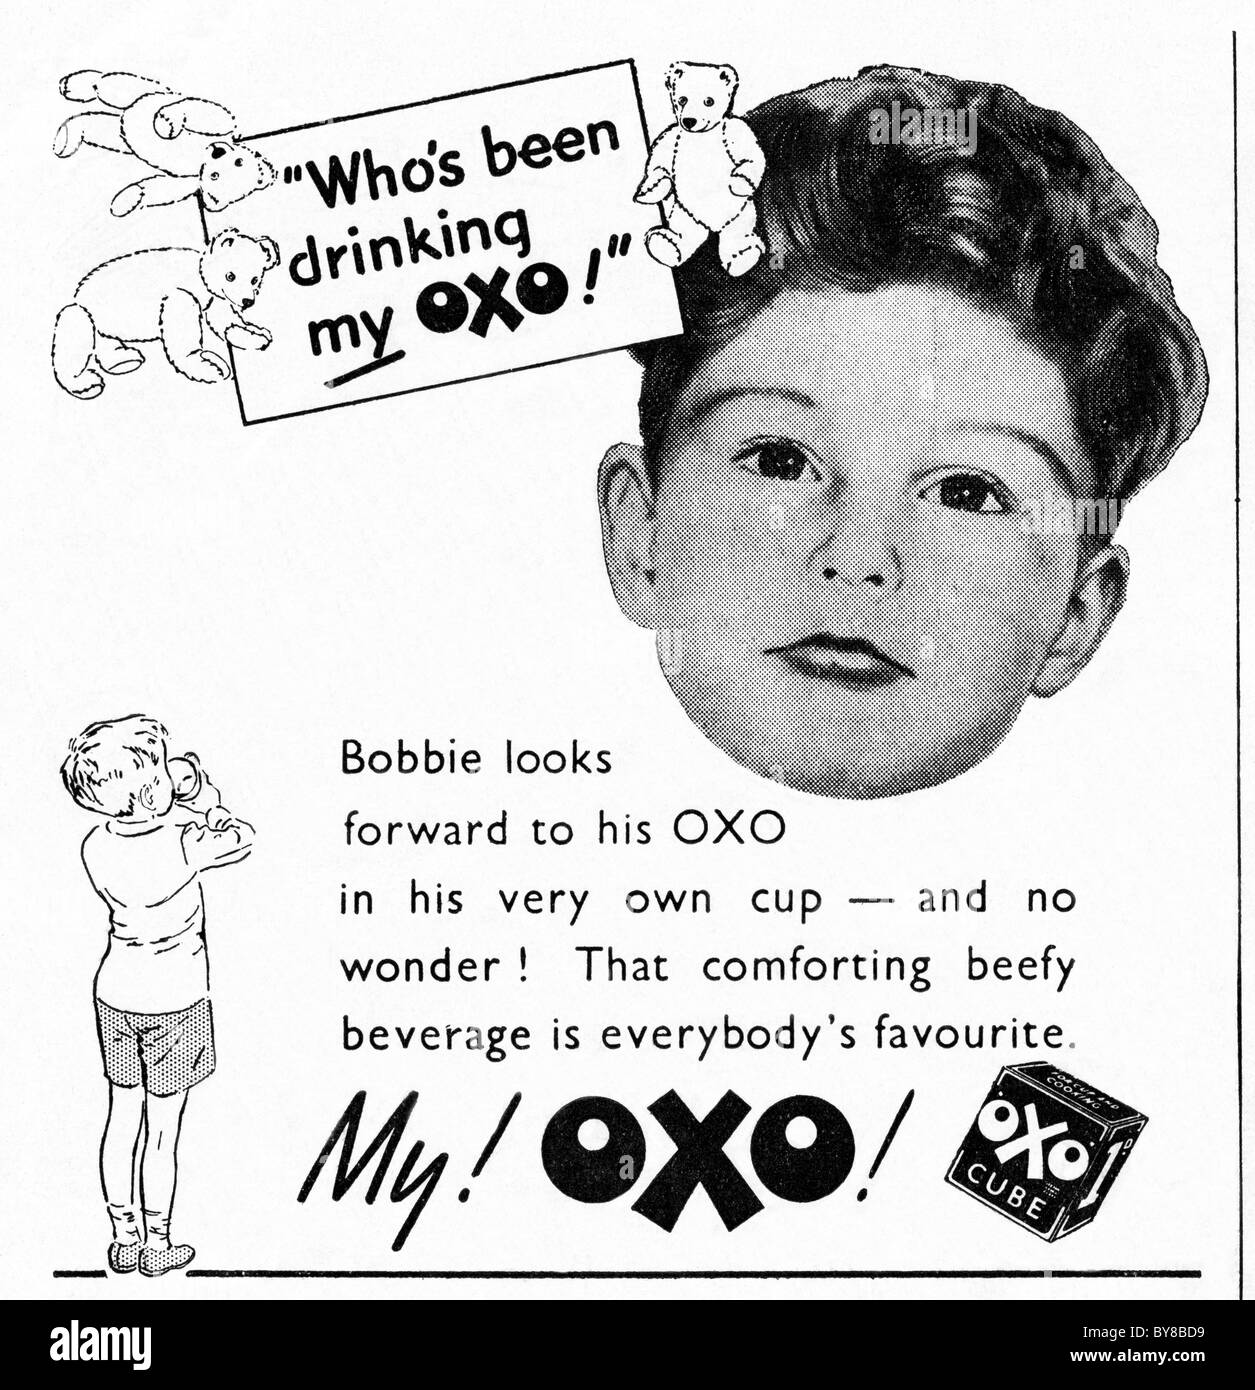 OXO cubes hanging advertisement